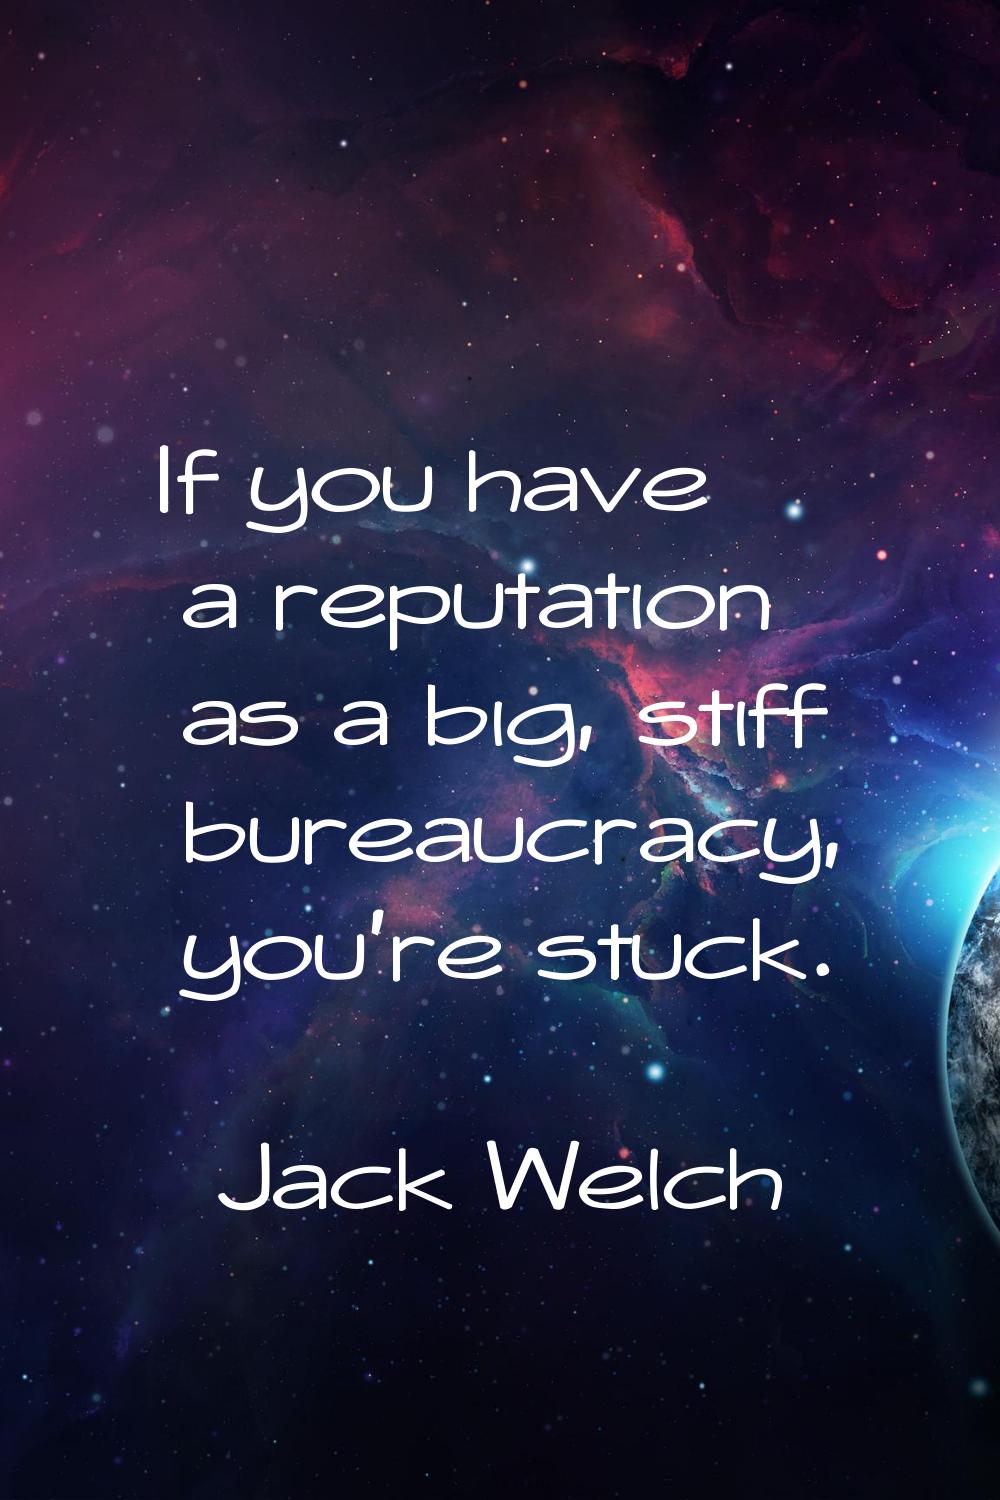 If you have a reputation as a big, stiff bureaucracy, you're stuck.